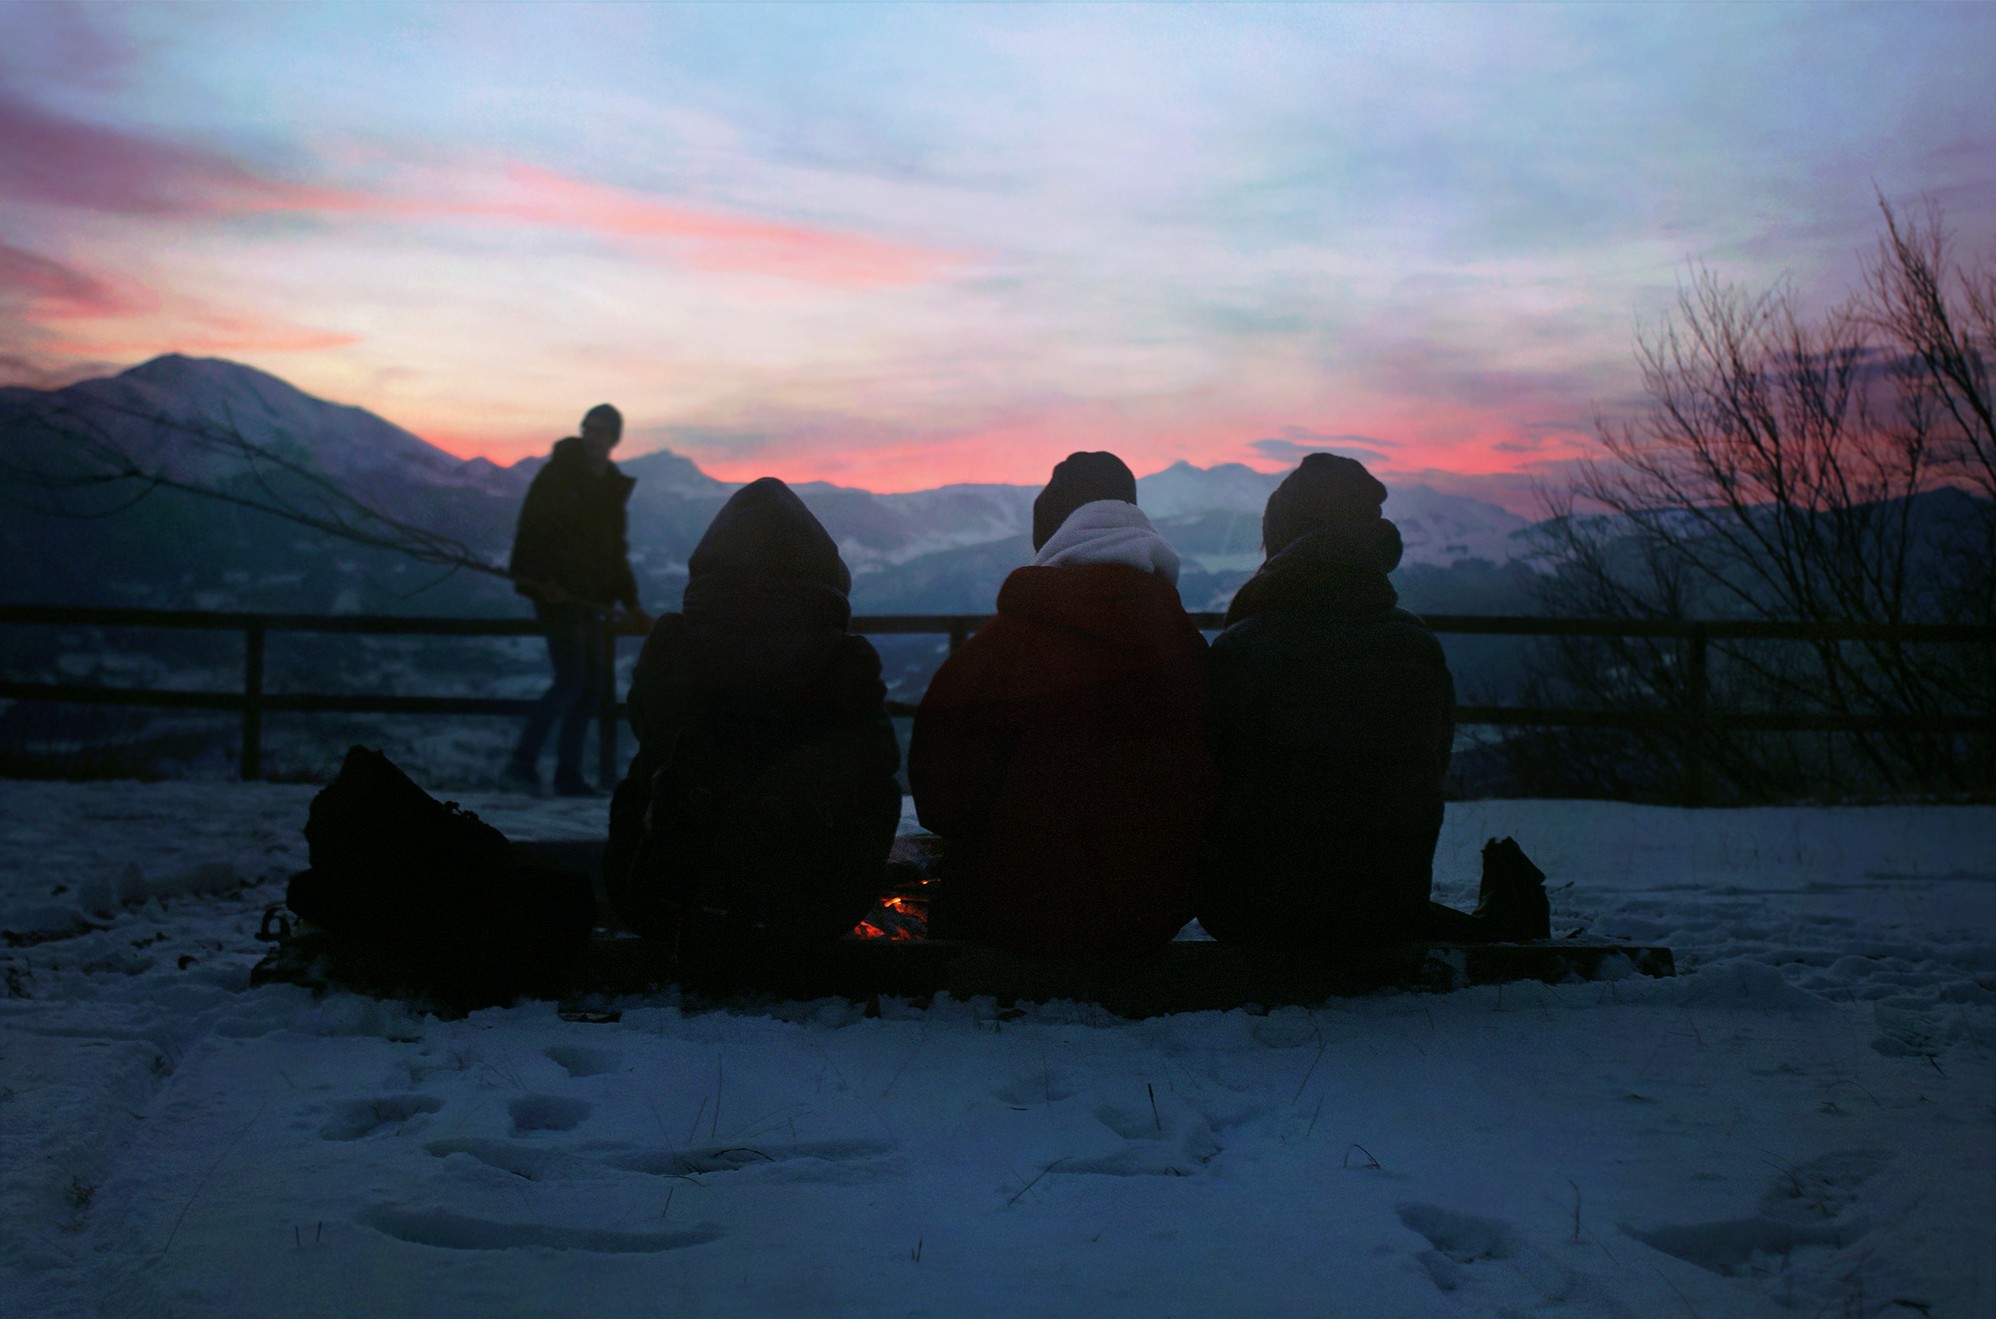 People 1996x1319 group of people social gathering rear view dark sky mountains landscape outdoors sitting